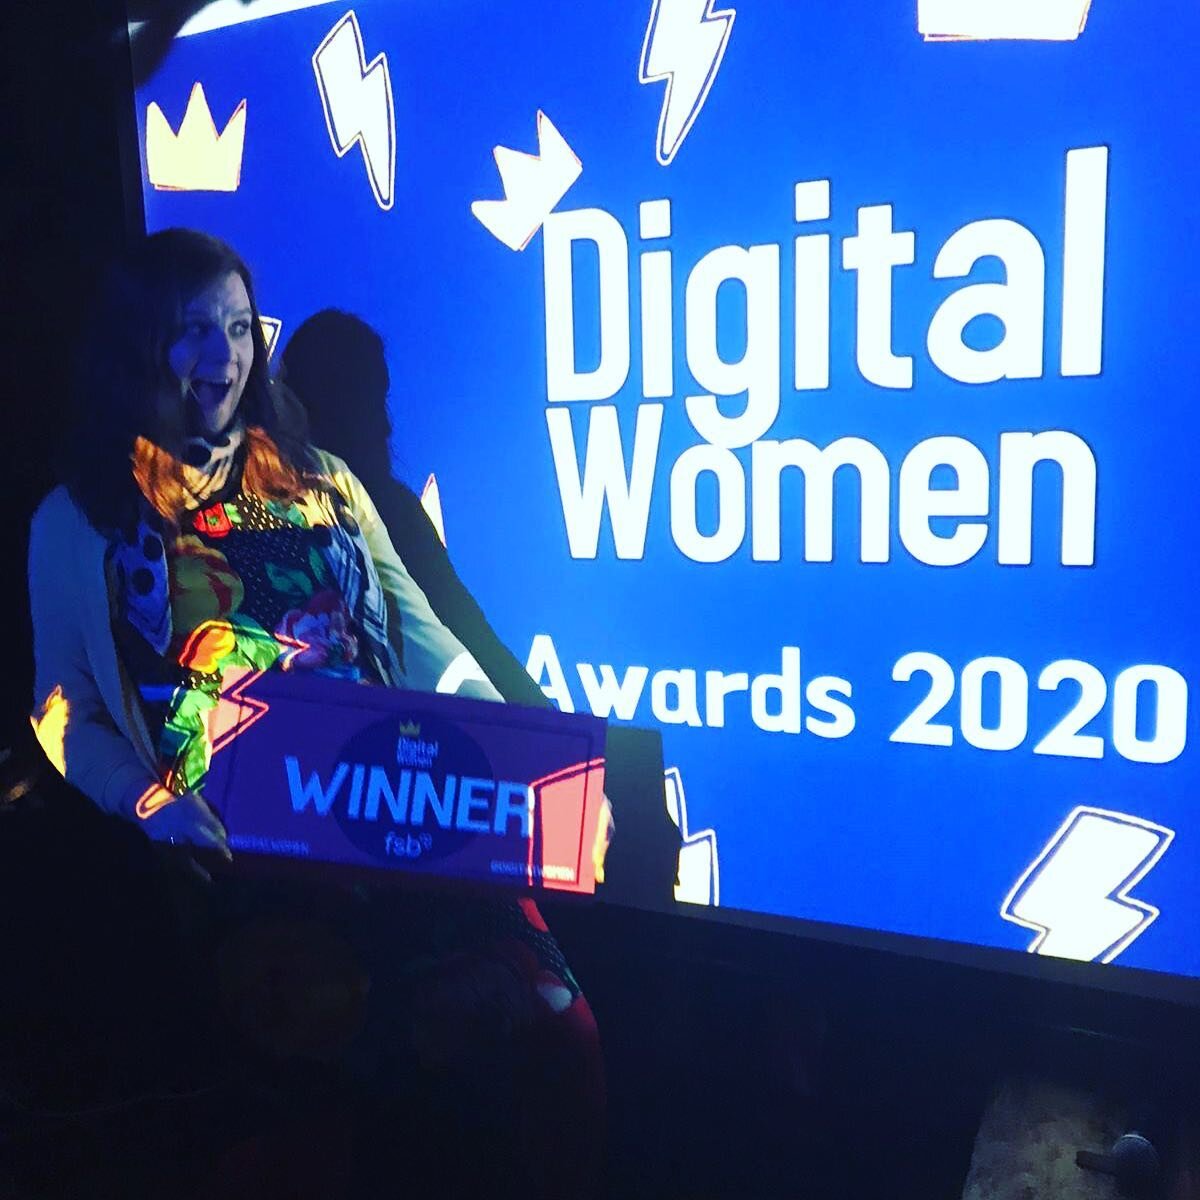 It&rsquo;s almost time for the #digitalwomenawards21!!

Biggest congratulations to everyone who was nominated or shortlisted, looking forward to being a judge and wondering who I&rsquo;m going to pass my crown of UK&rsquo;s Digital Women of the Year 